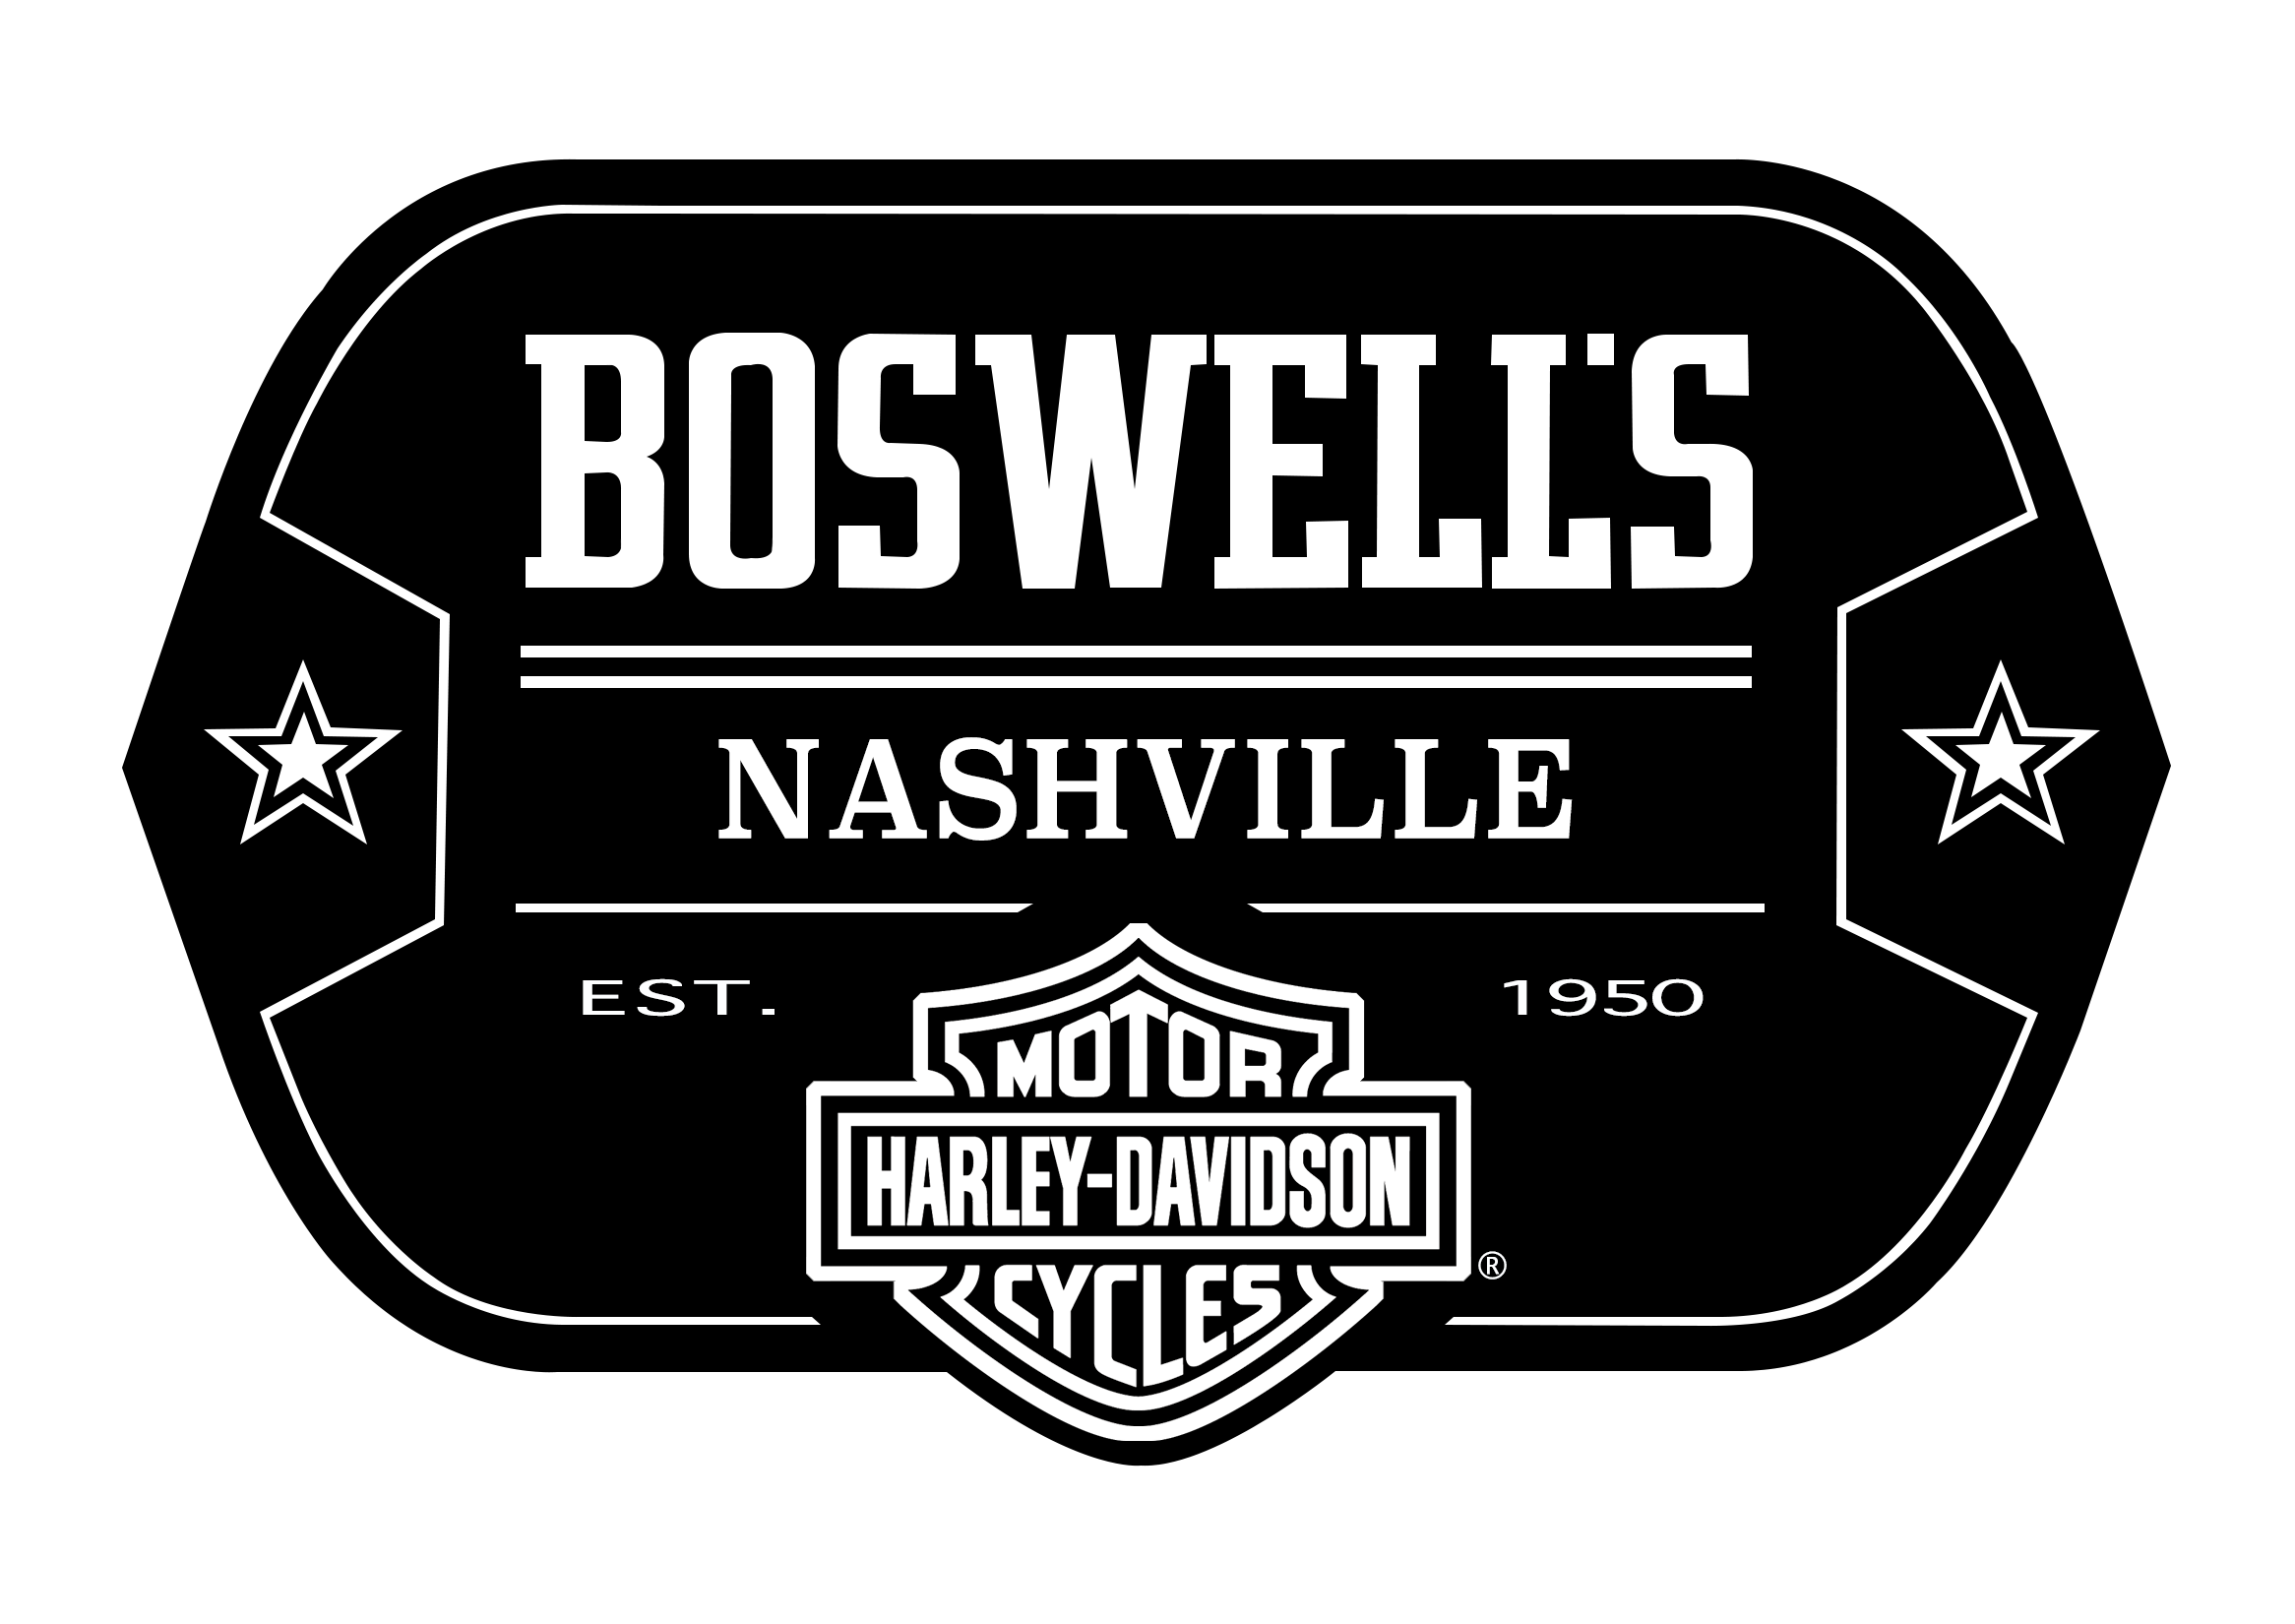 Get Excellent Harley-Davidson® Motorcycles at Boswell's Harley-Davidson®